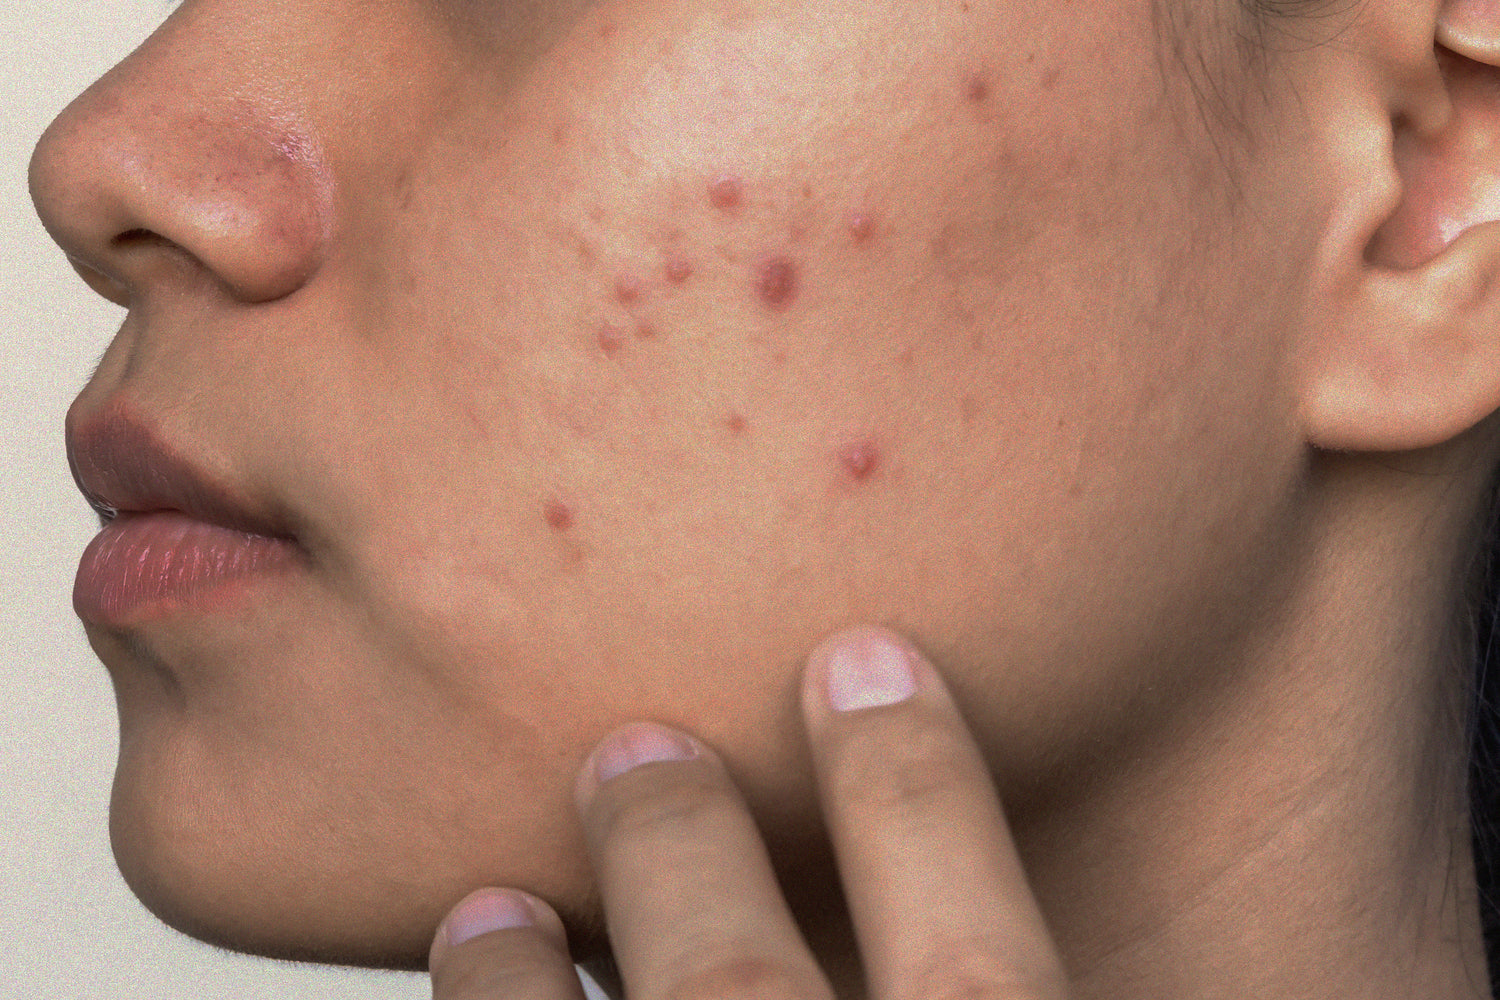 Acne: When Is The Right Time To Seek Expert Help?